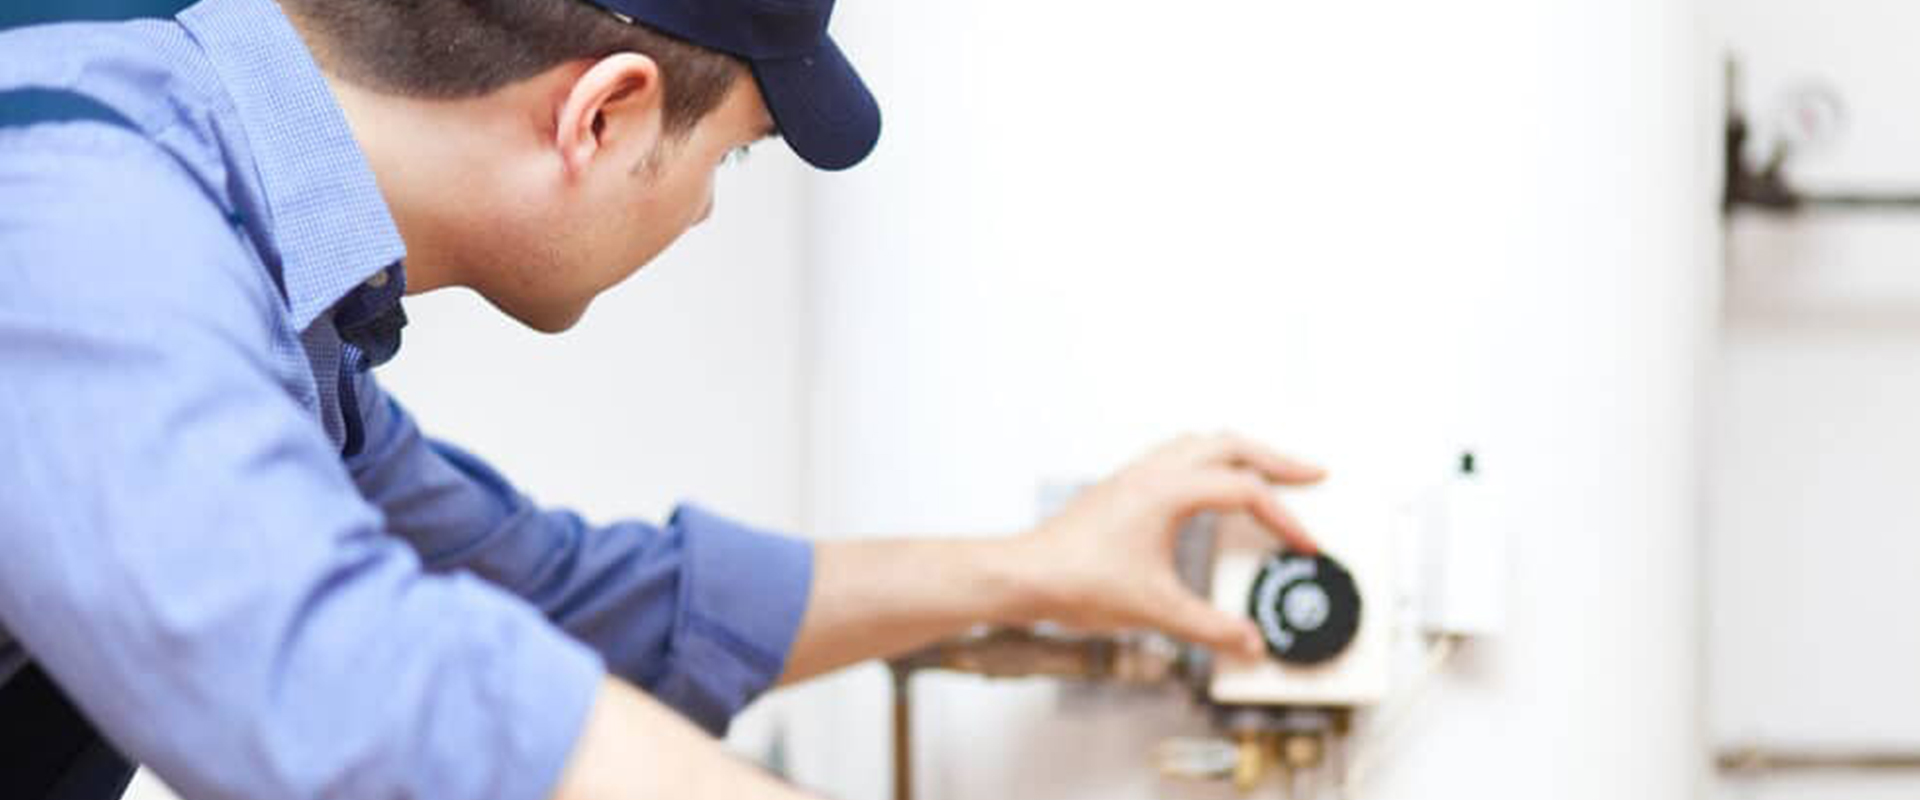 Water Heater Servicing by Expert